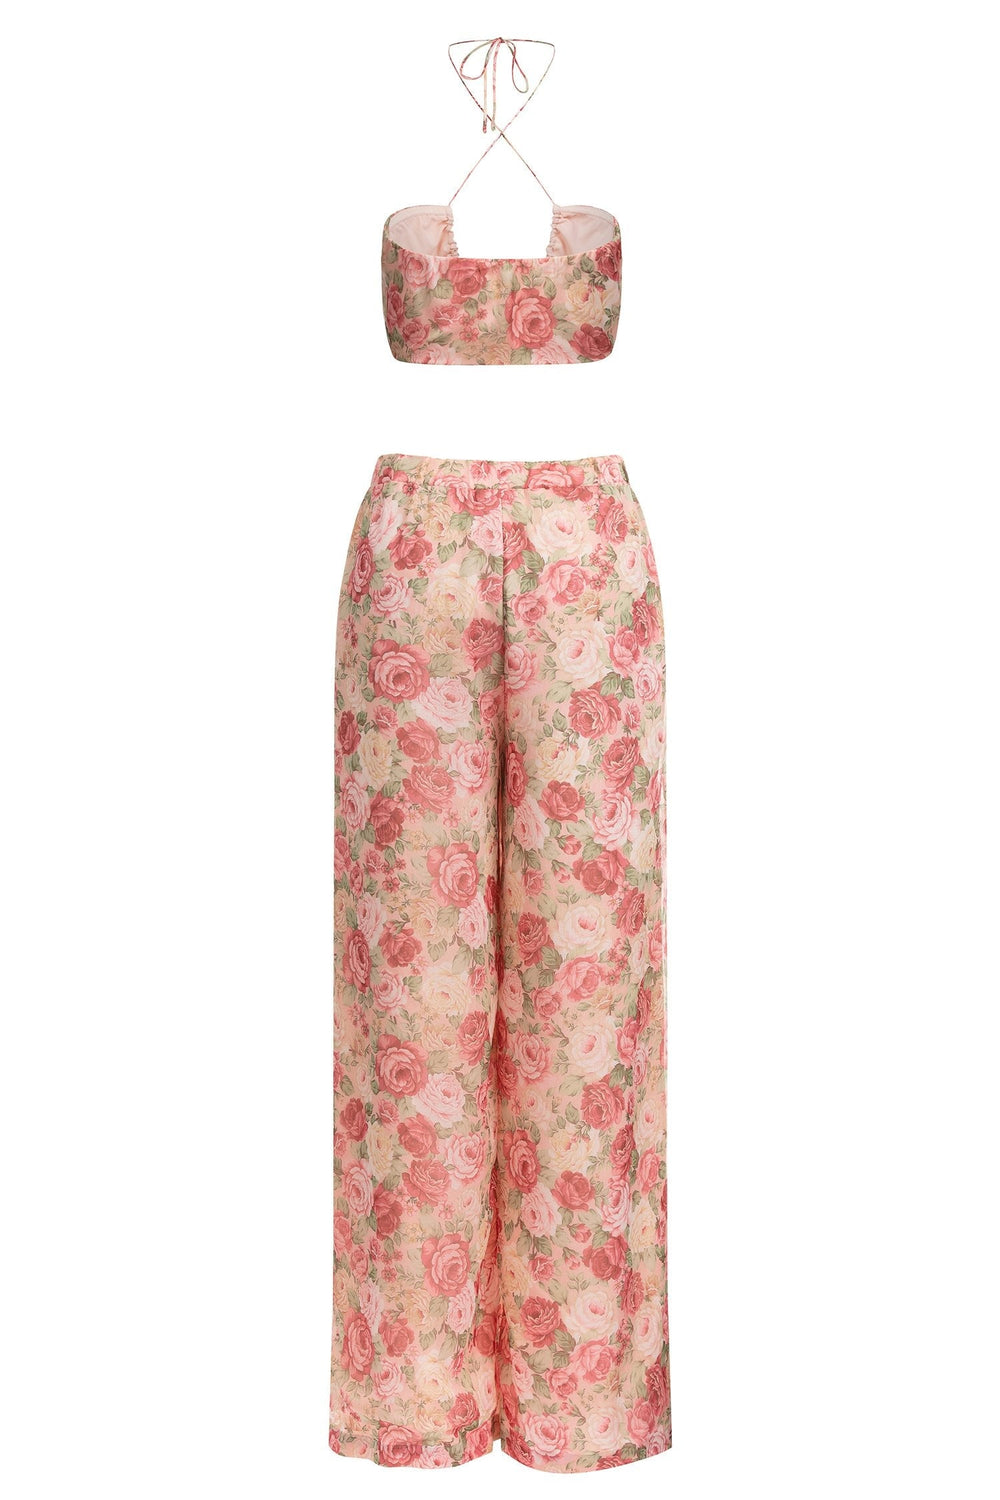 Cecily Set - Floral Print Cropped Top & High Waist Pants Two Piece Set 